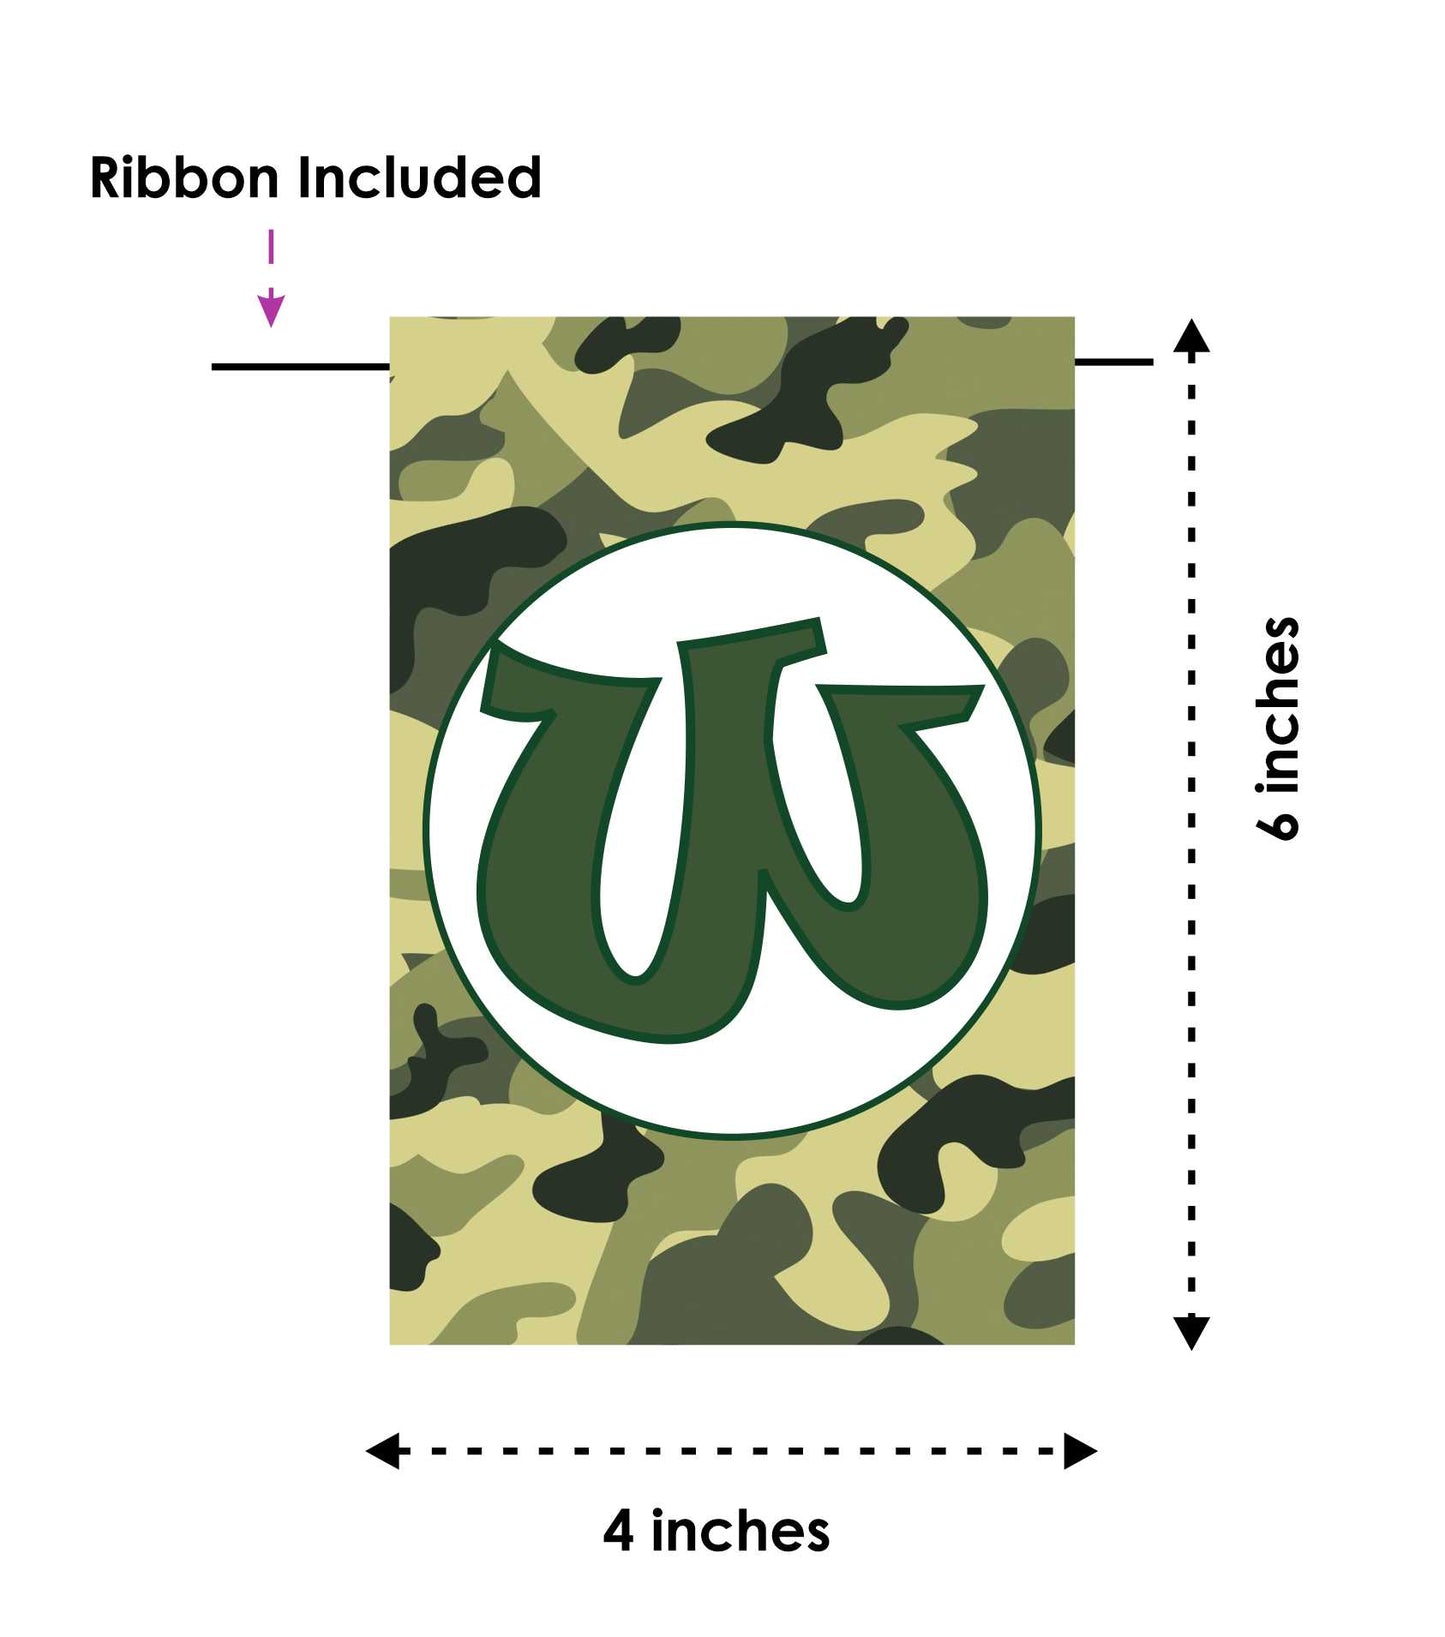 Camo Military Theme Welcome Banner for Party Entrance Home Welcoming Birthday Decoration Party Item